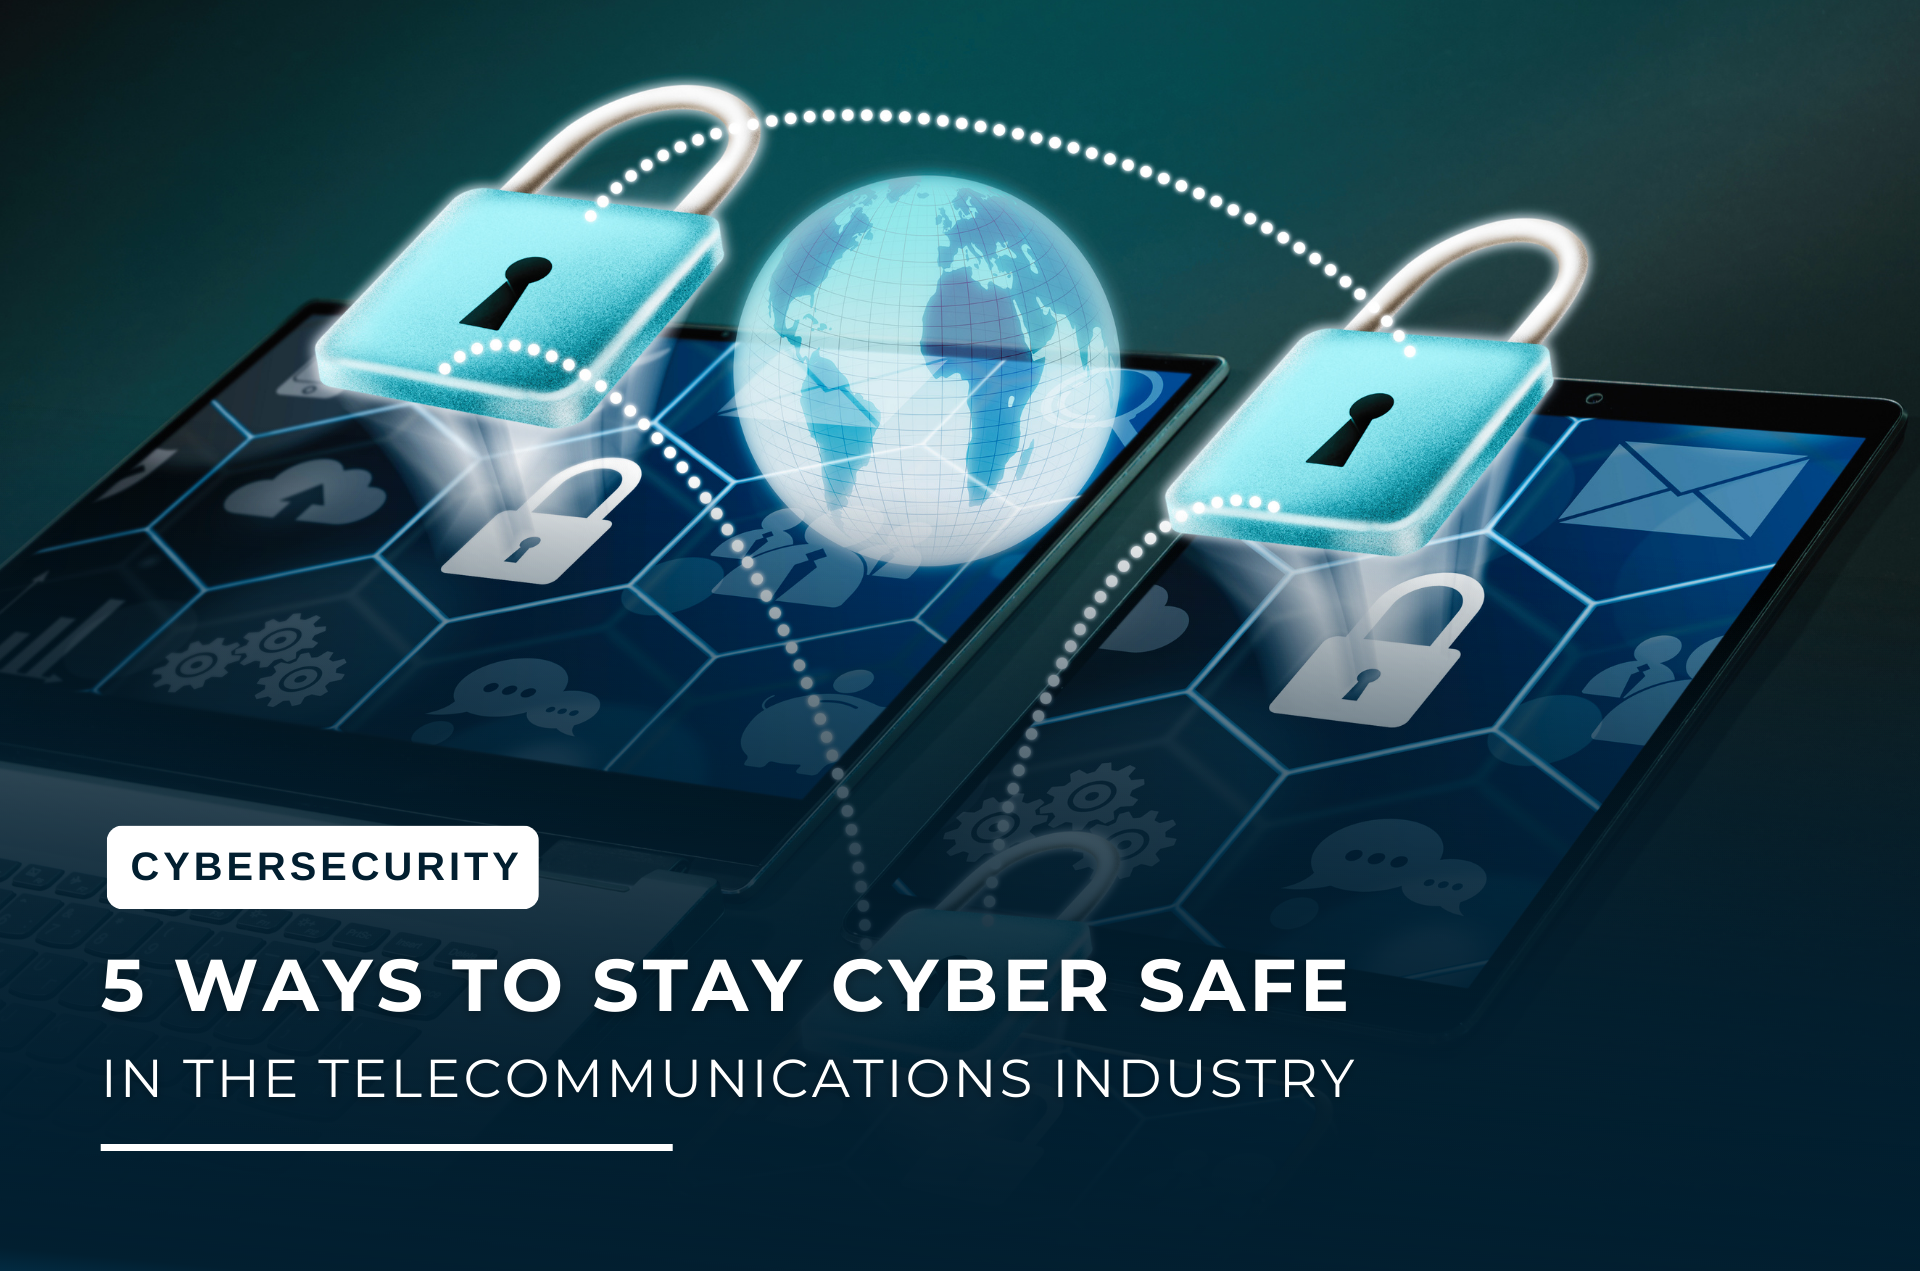 5 Ways to Stay Cyber Safe in the Telecommunications Industry